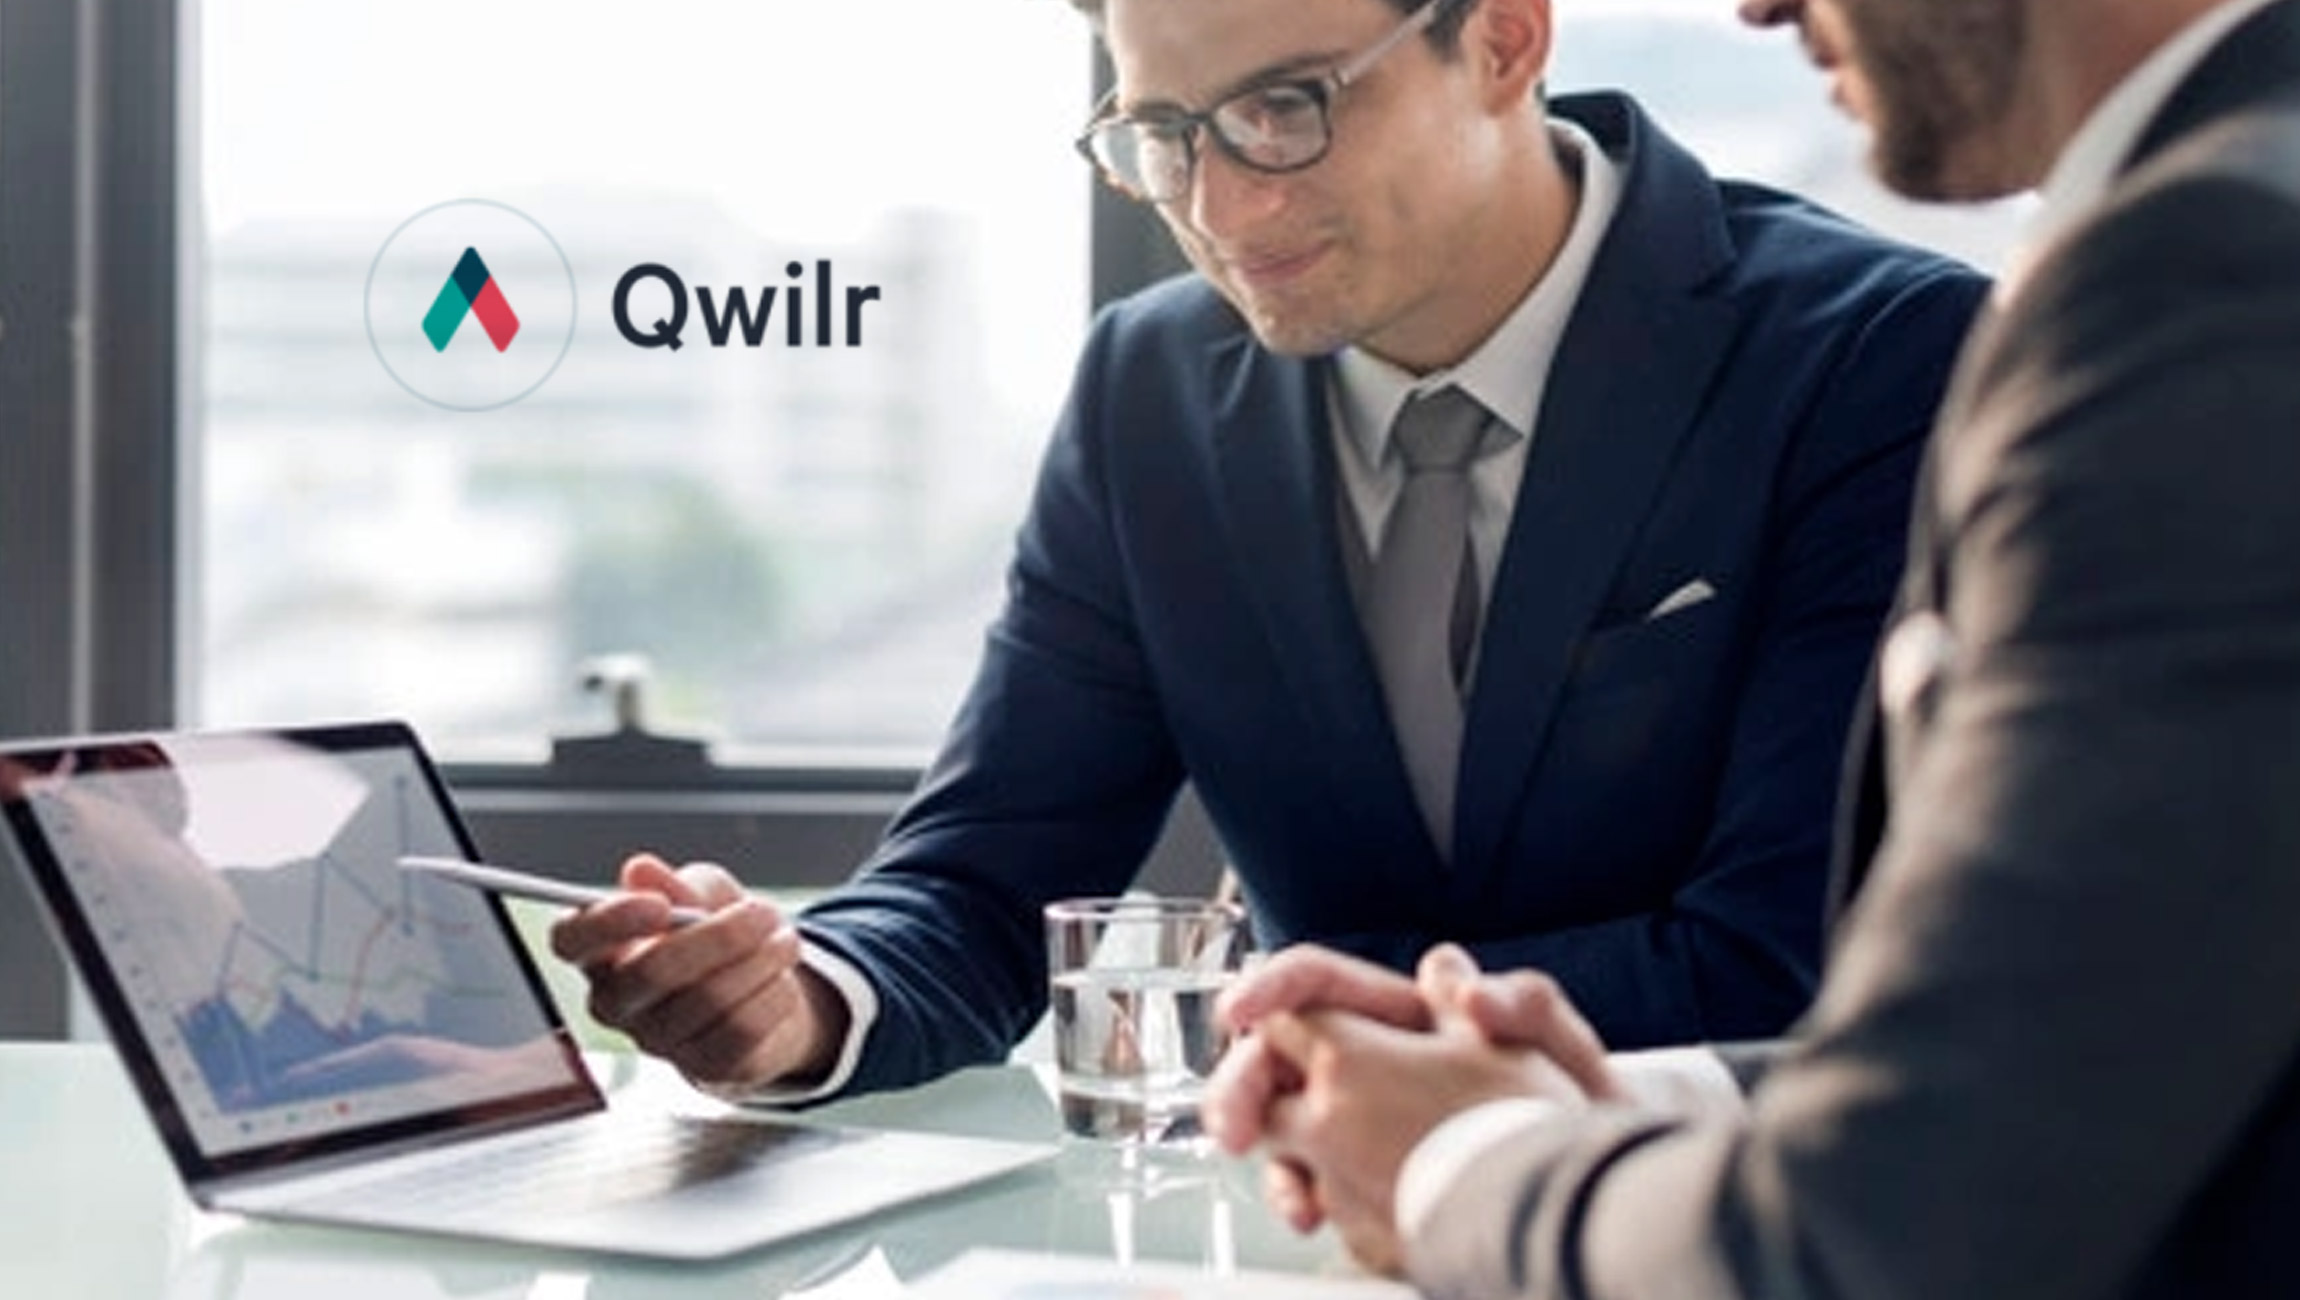 New Research from Qwilr Reveals SaaS Buyer Trends and How to Increase Software Sales